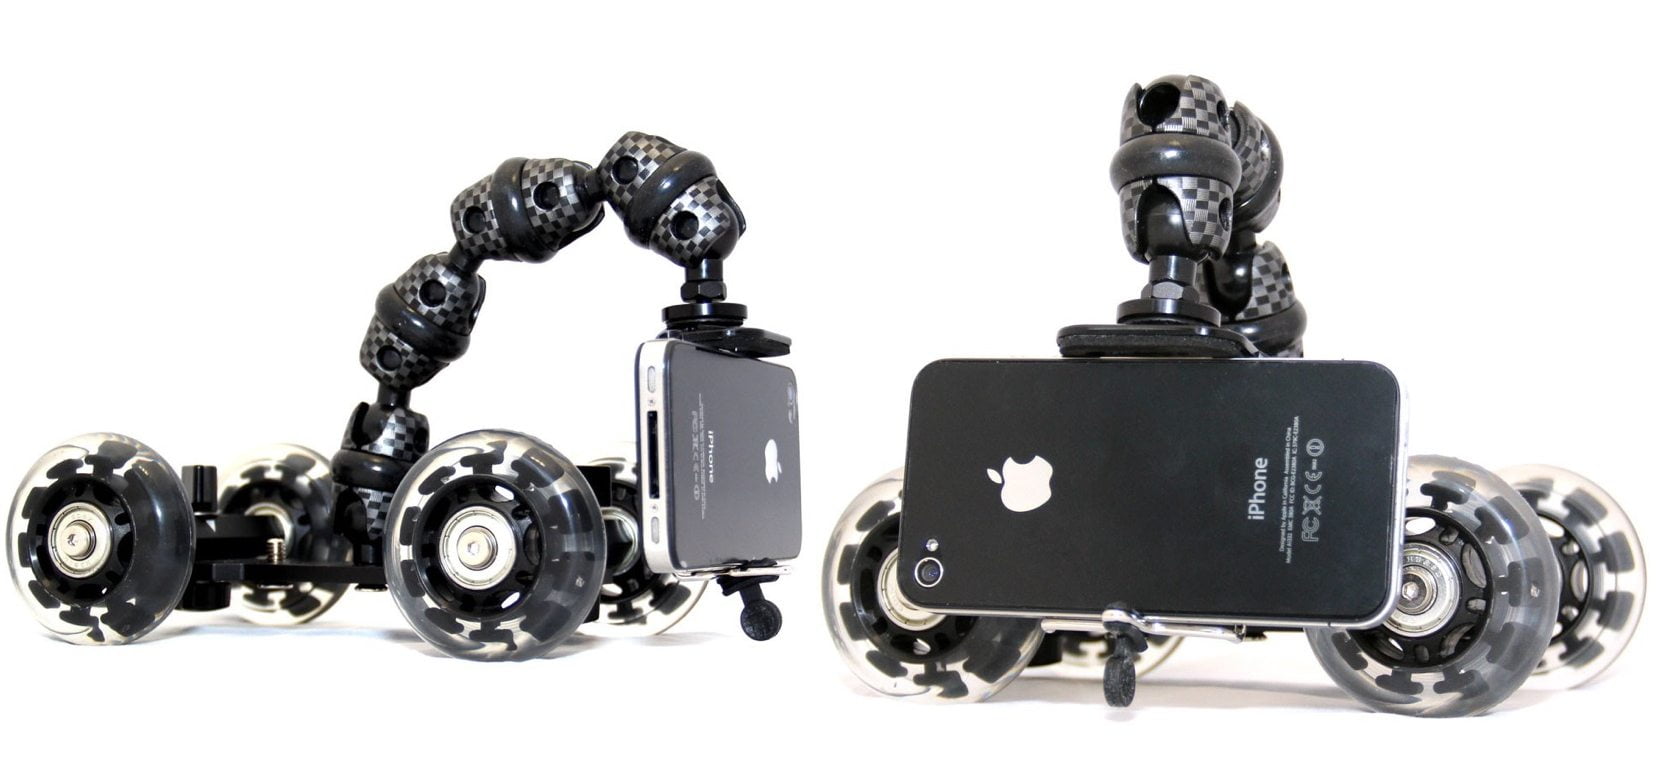 iStabilizer Dolly for Smartphones Review